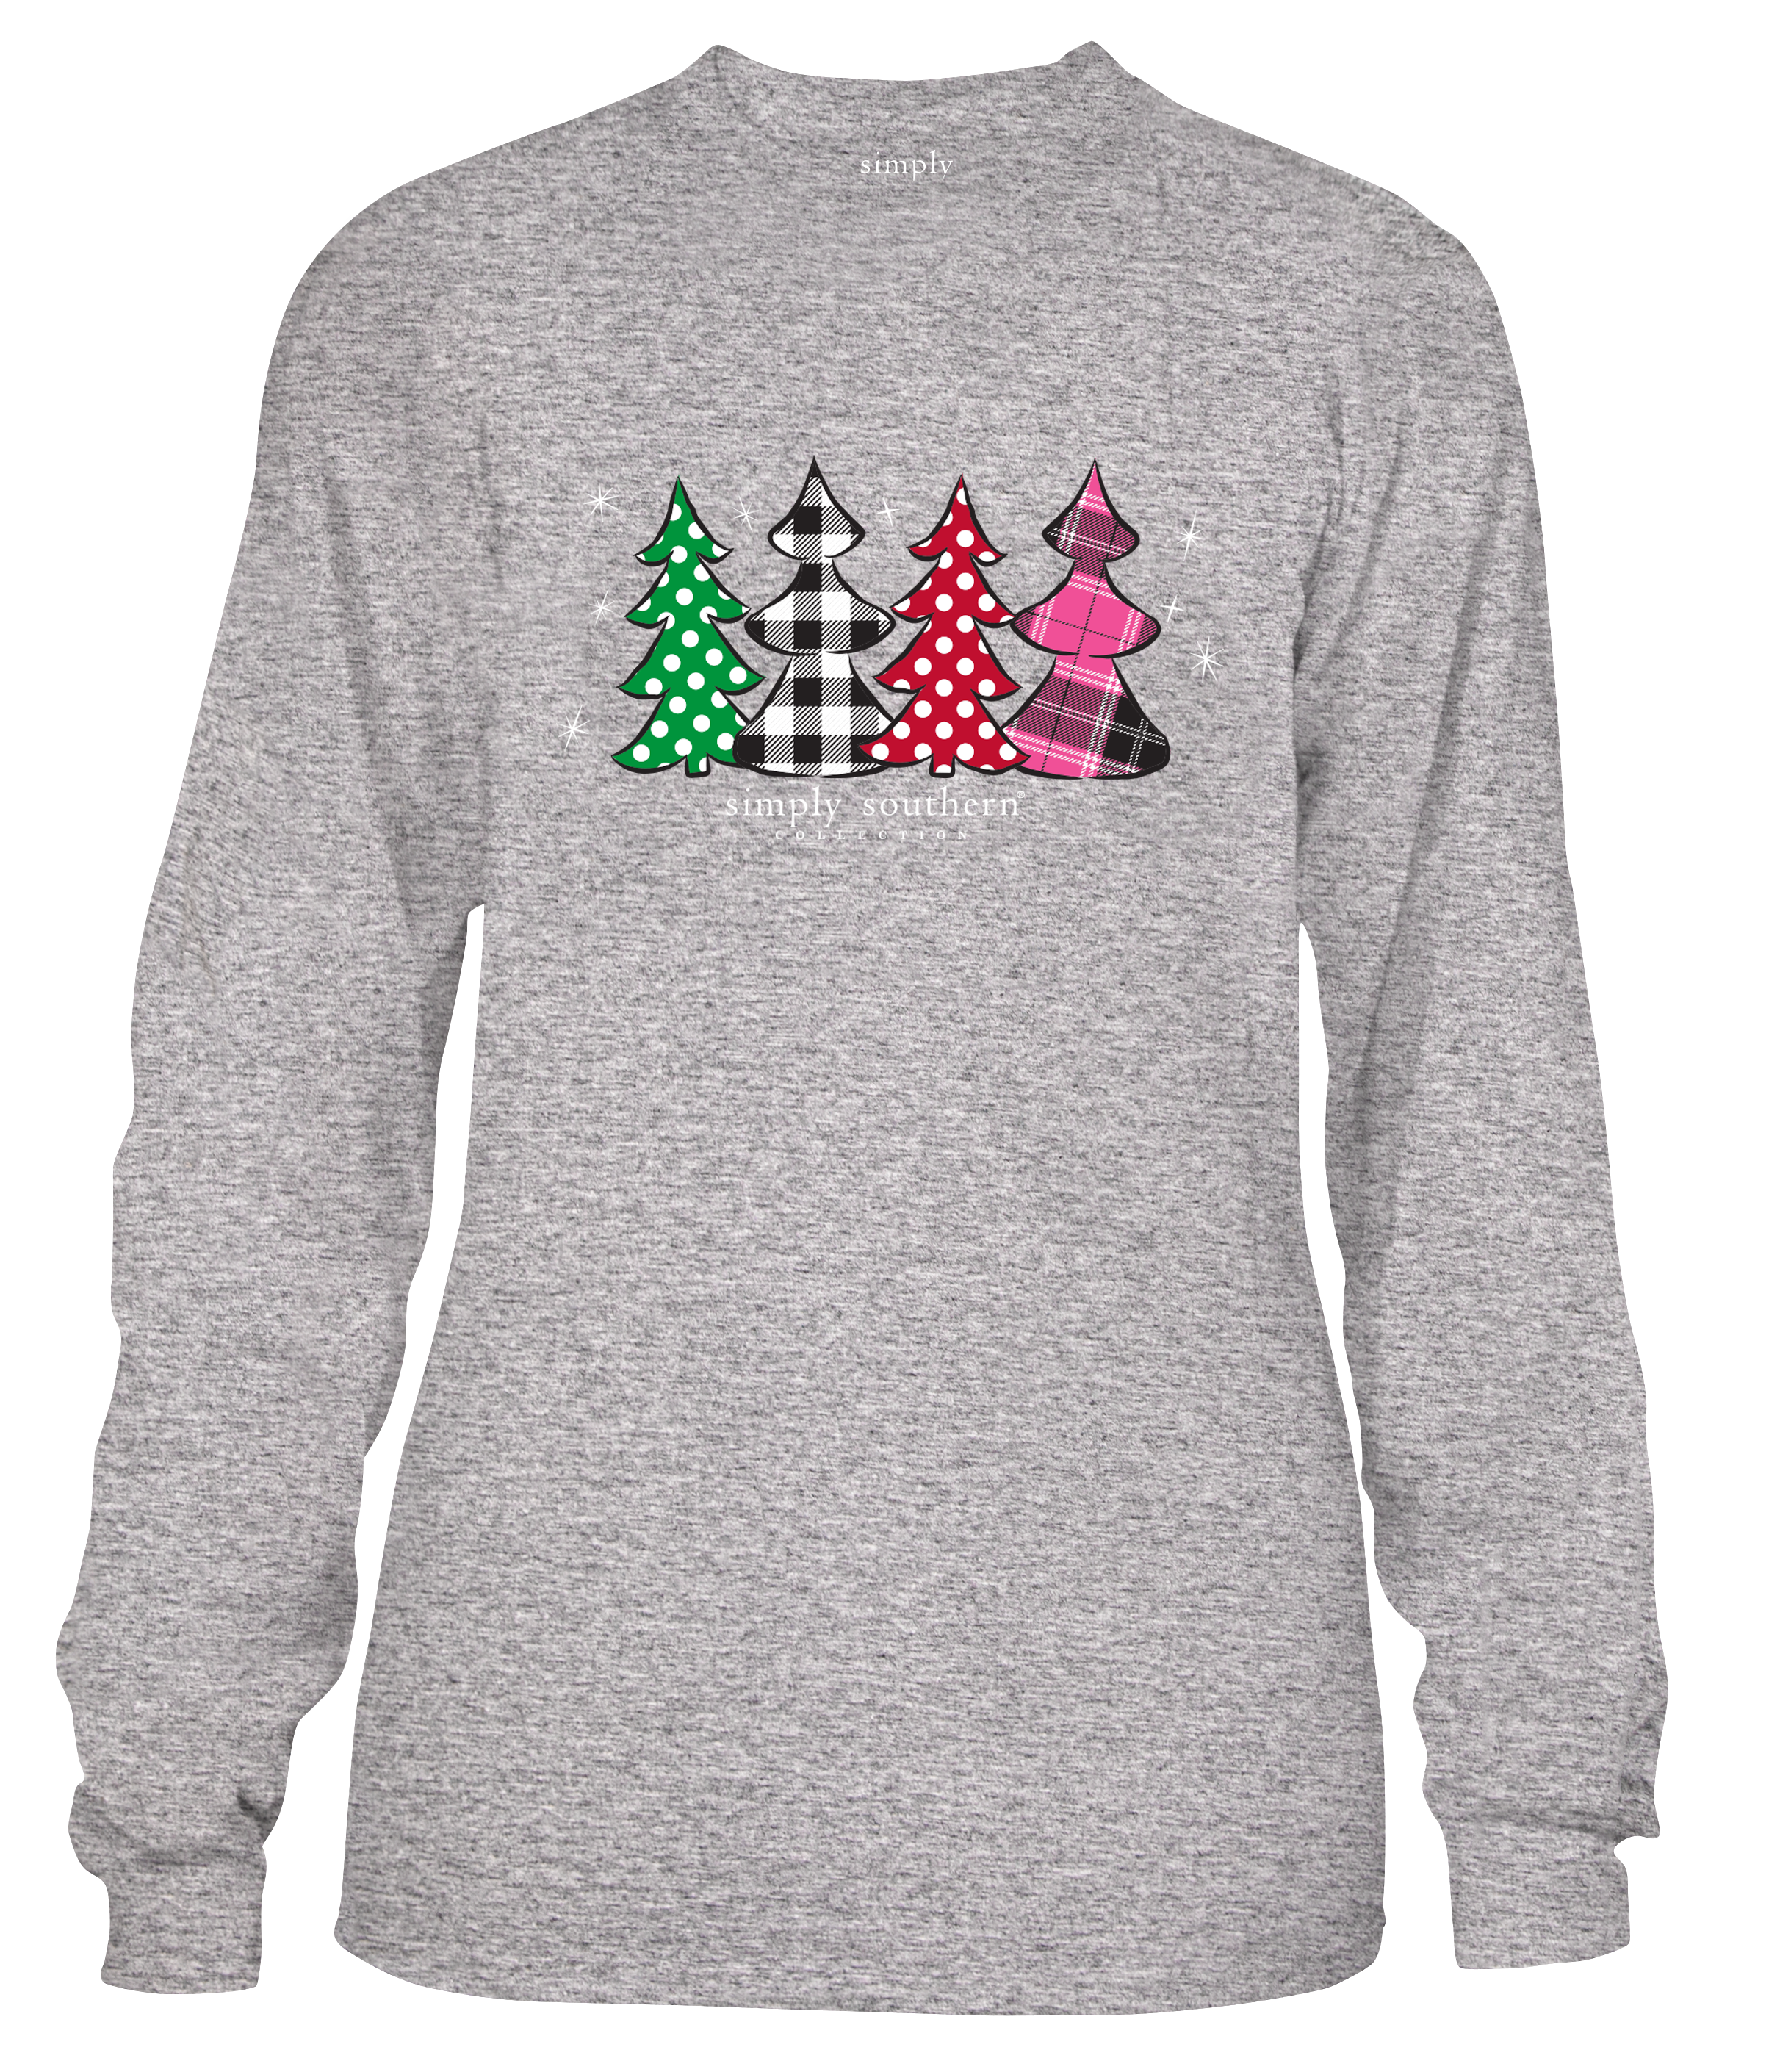 'Messy & Bright' Christmas Long Sleeve Tee by Simply Southern